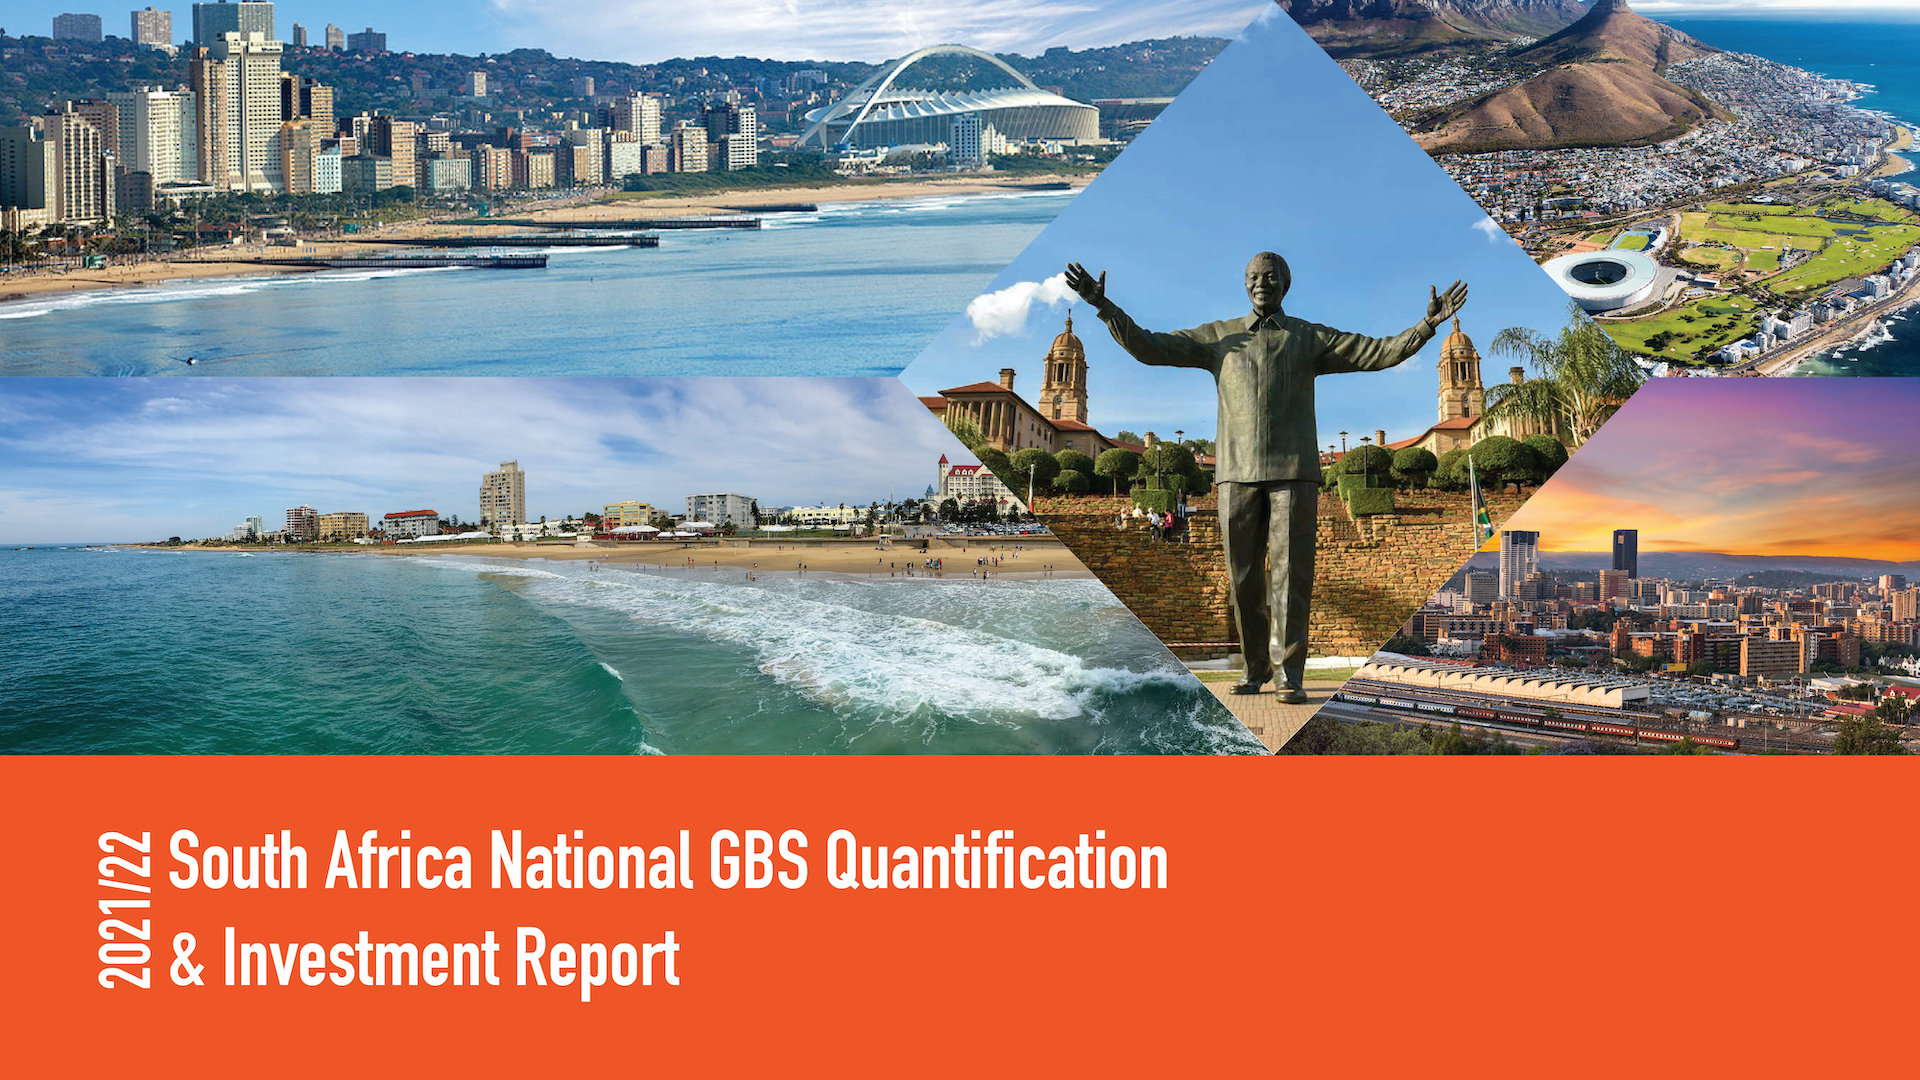 South Africa releases national GBS quantification report to global analysts and investors